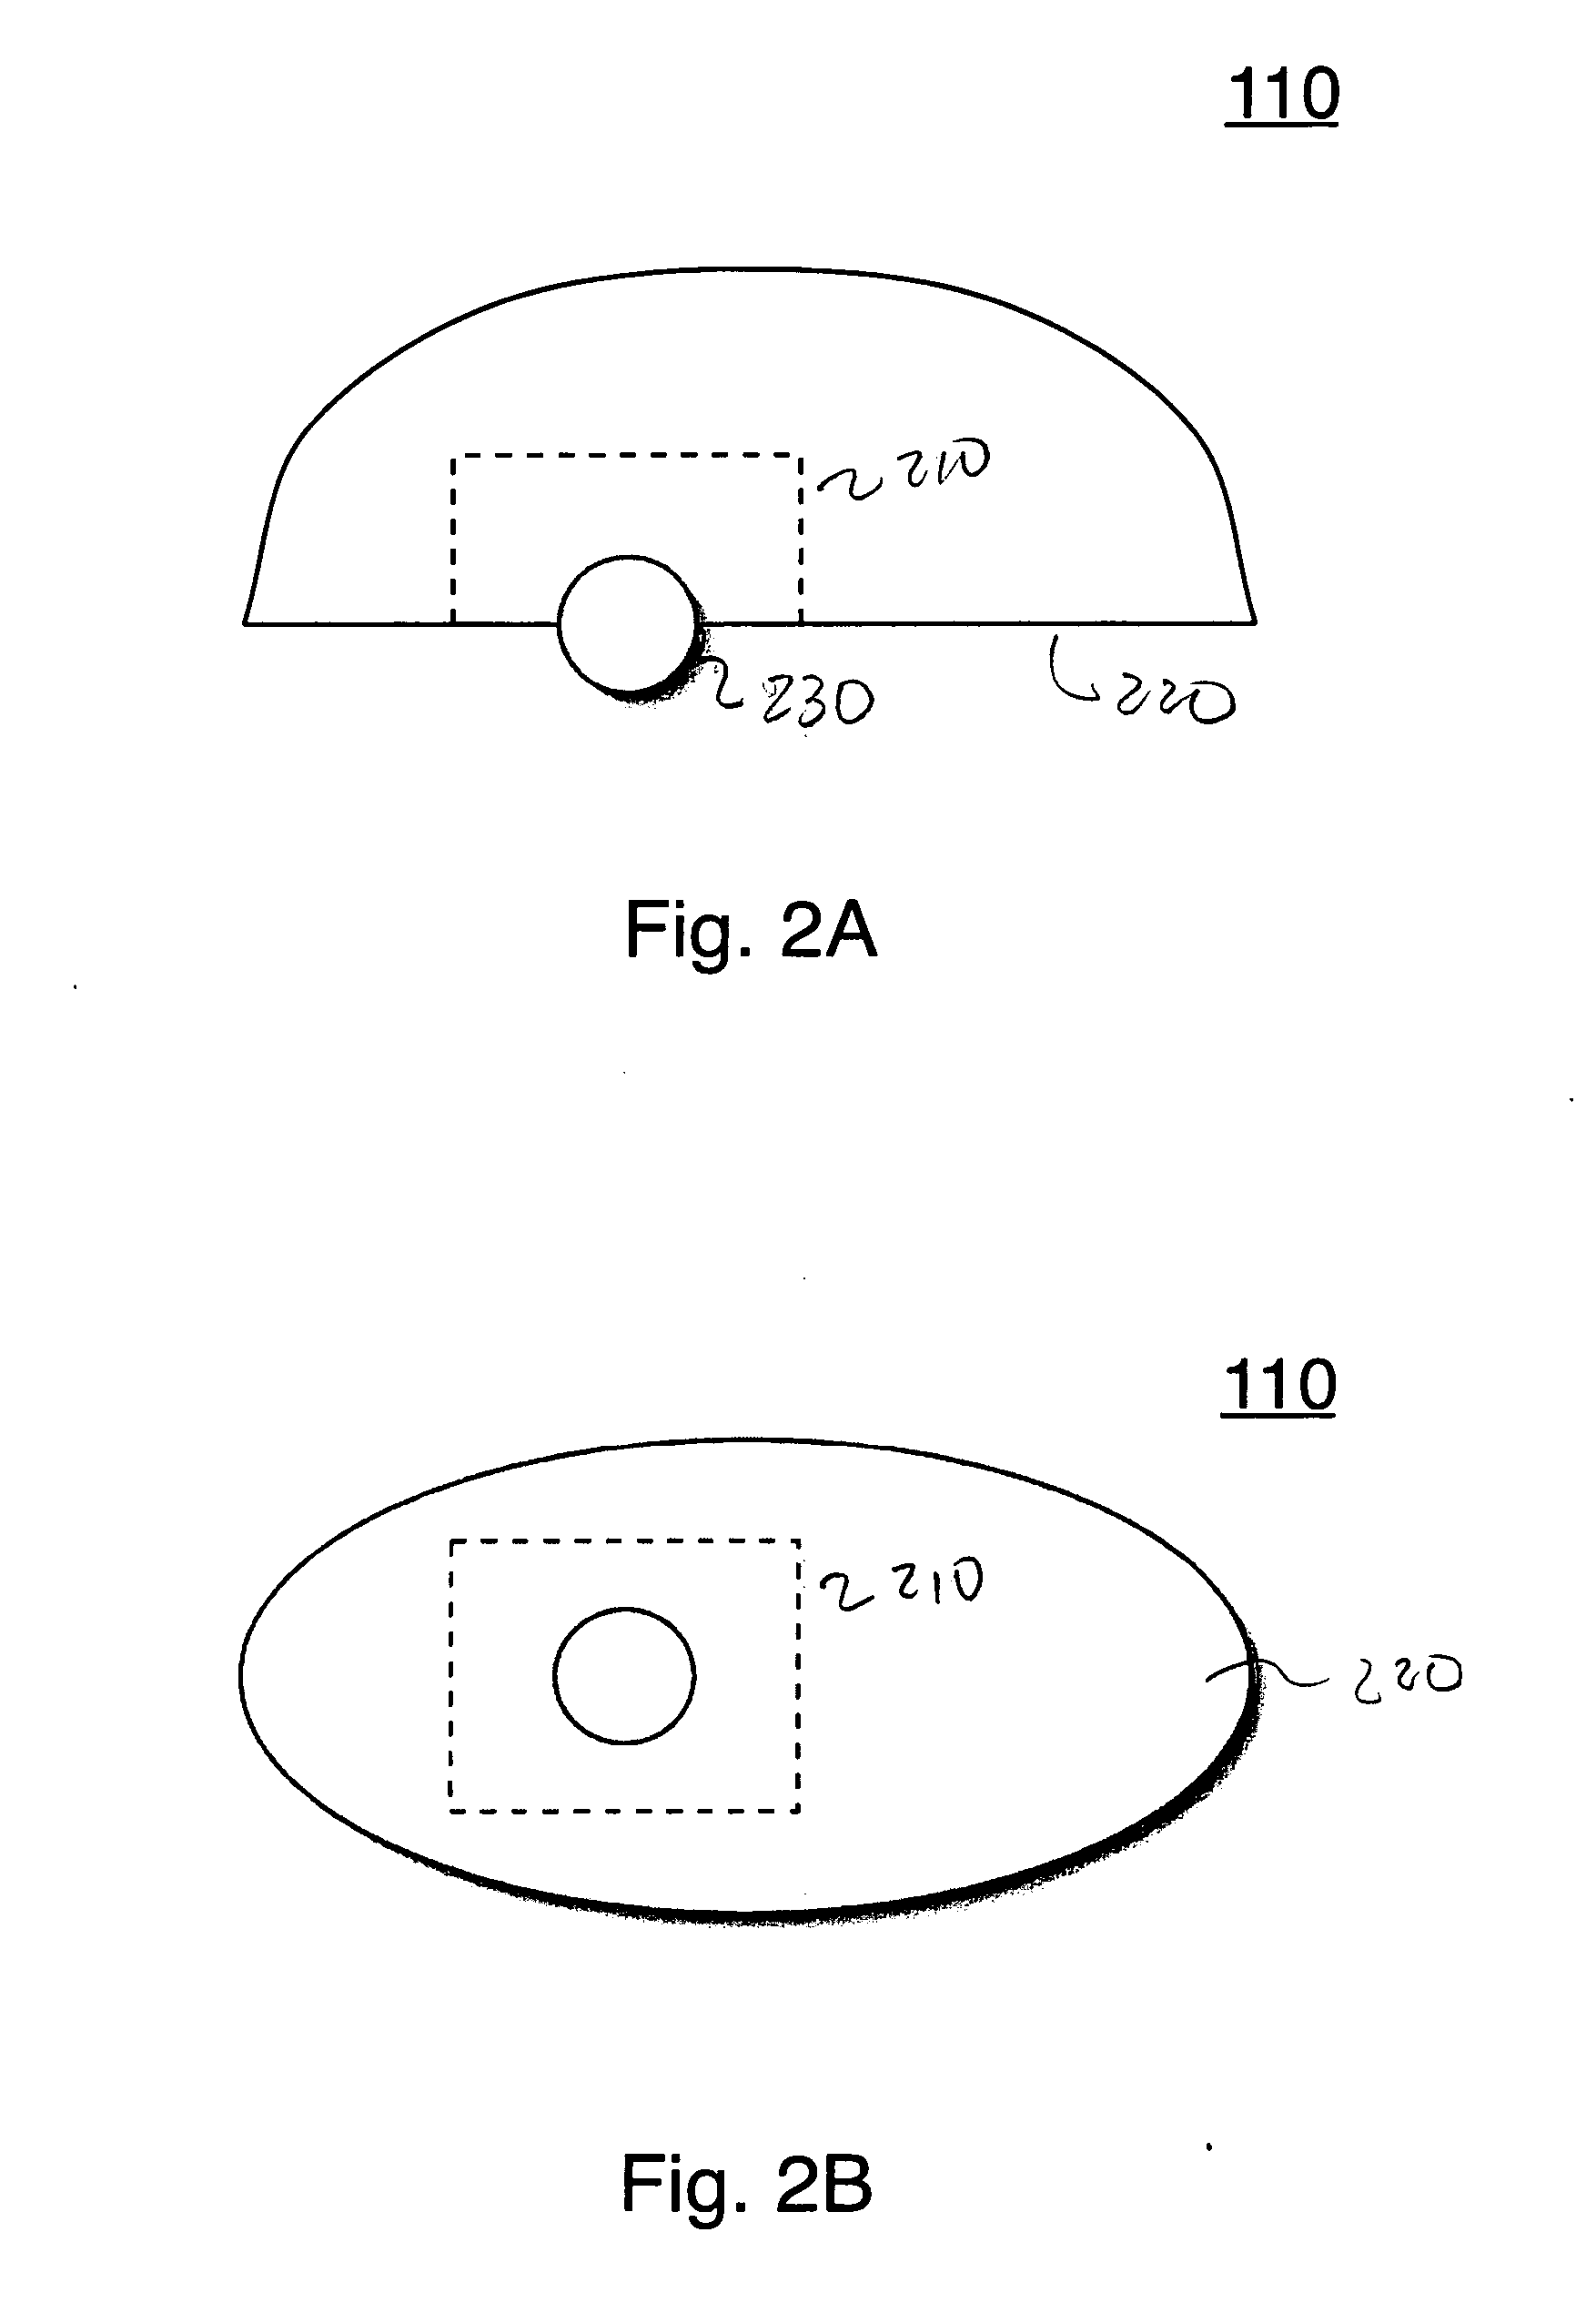 System and method for an optical navigation device configured to generate navigation information through an optically transparent layer and to have skating functionality